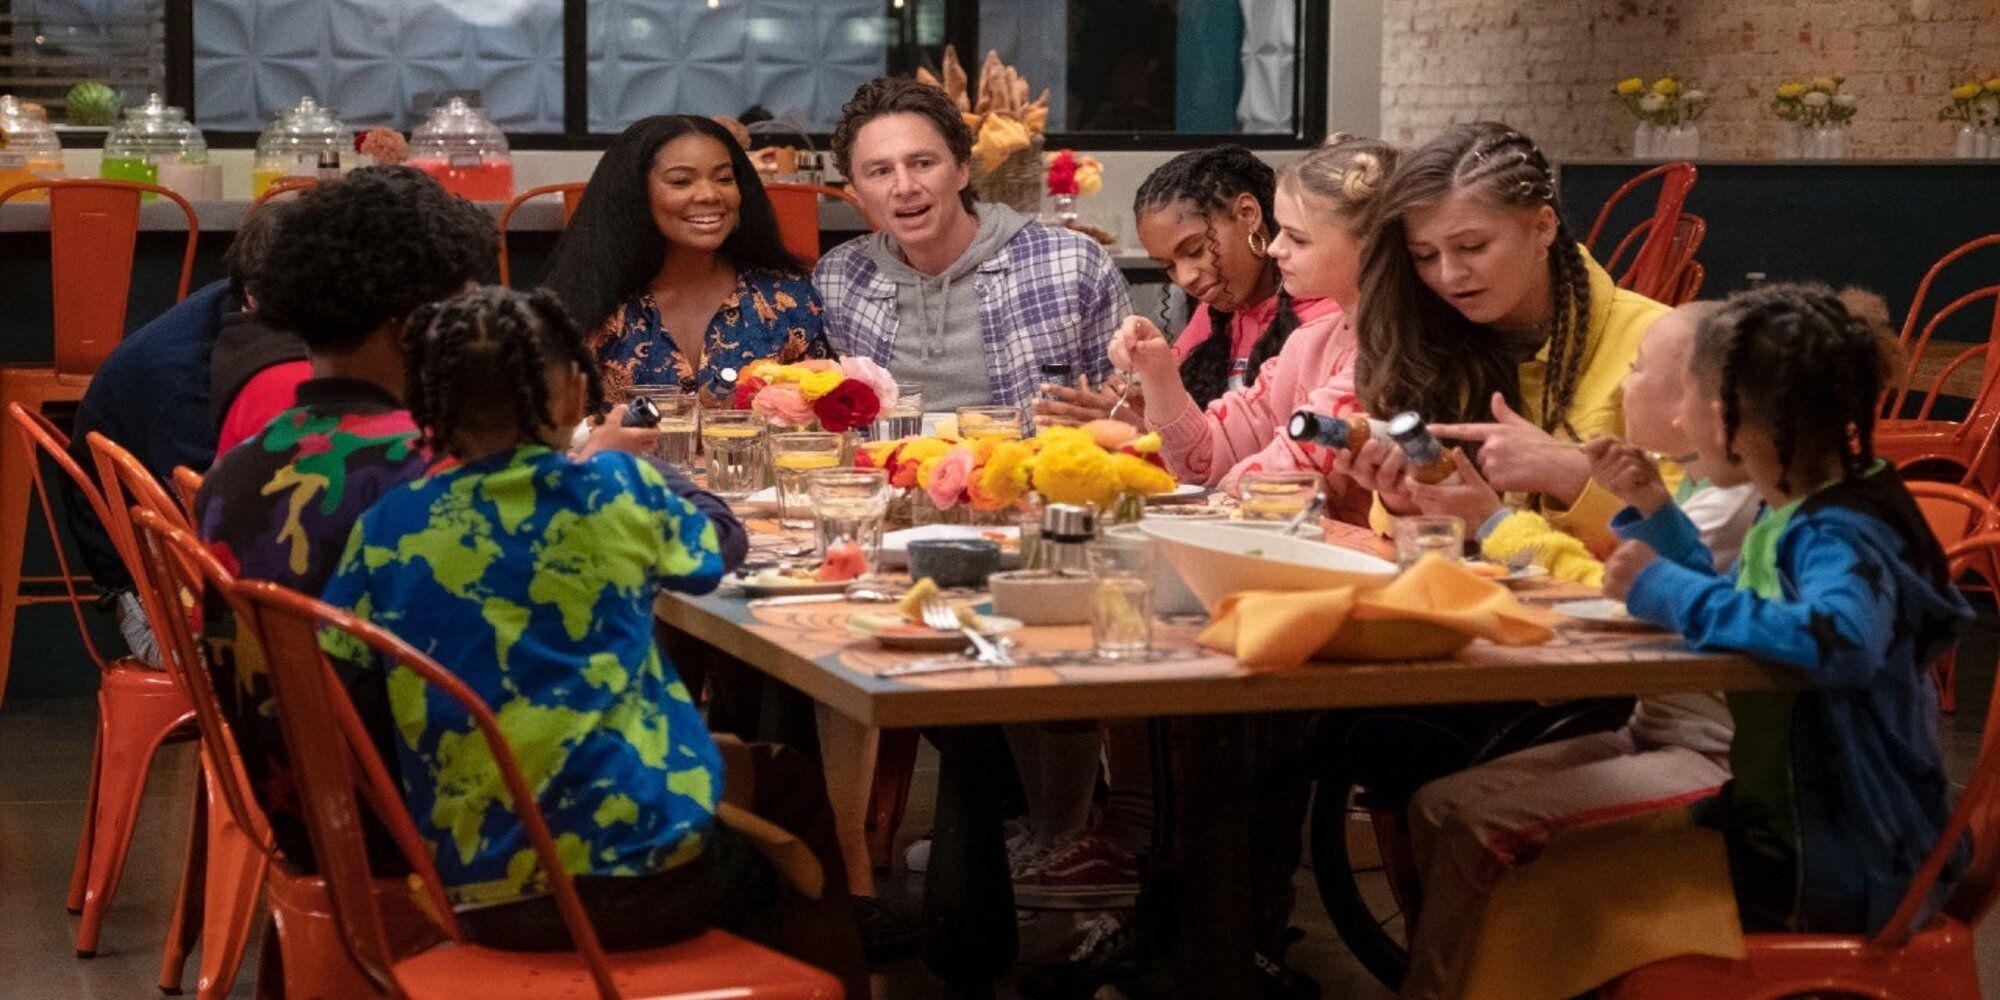 The 2022 Reboot Baker Family Sat at for a meal together looking happy